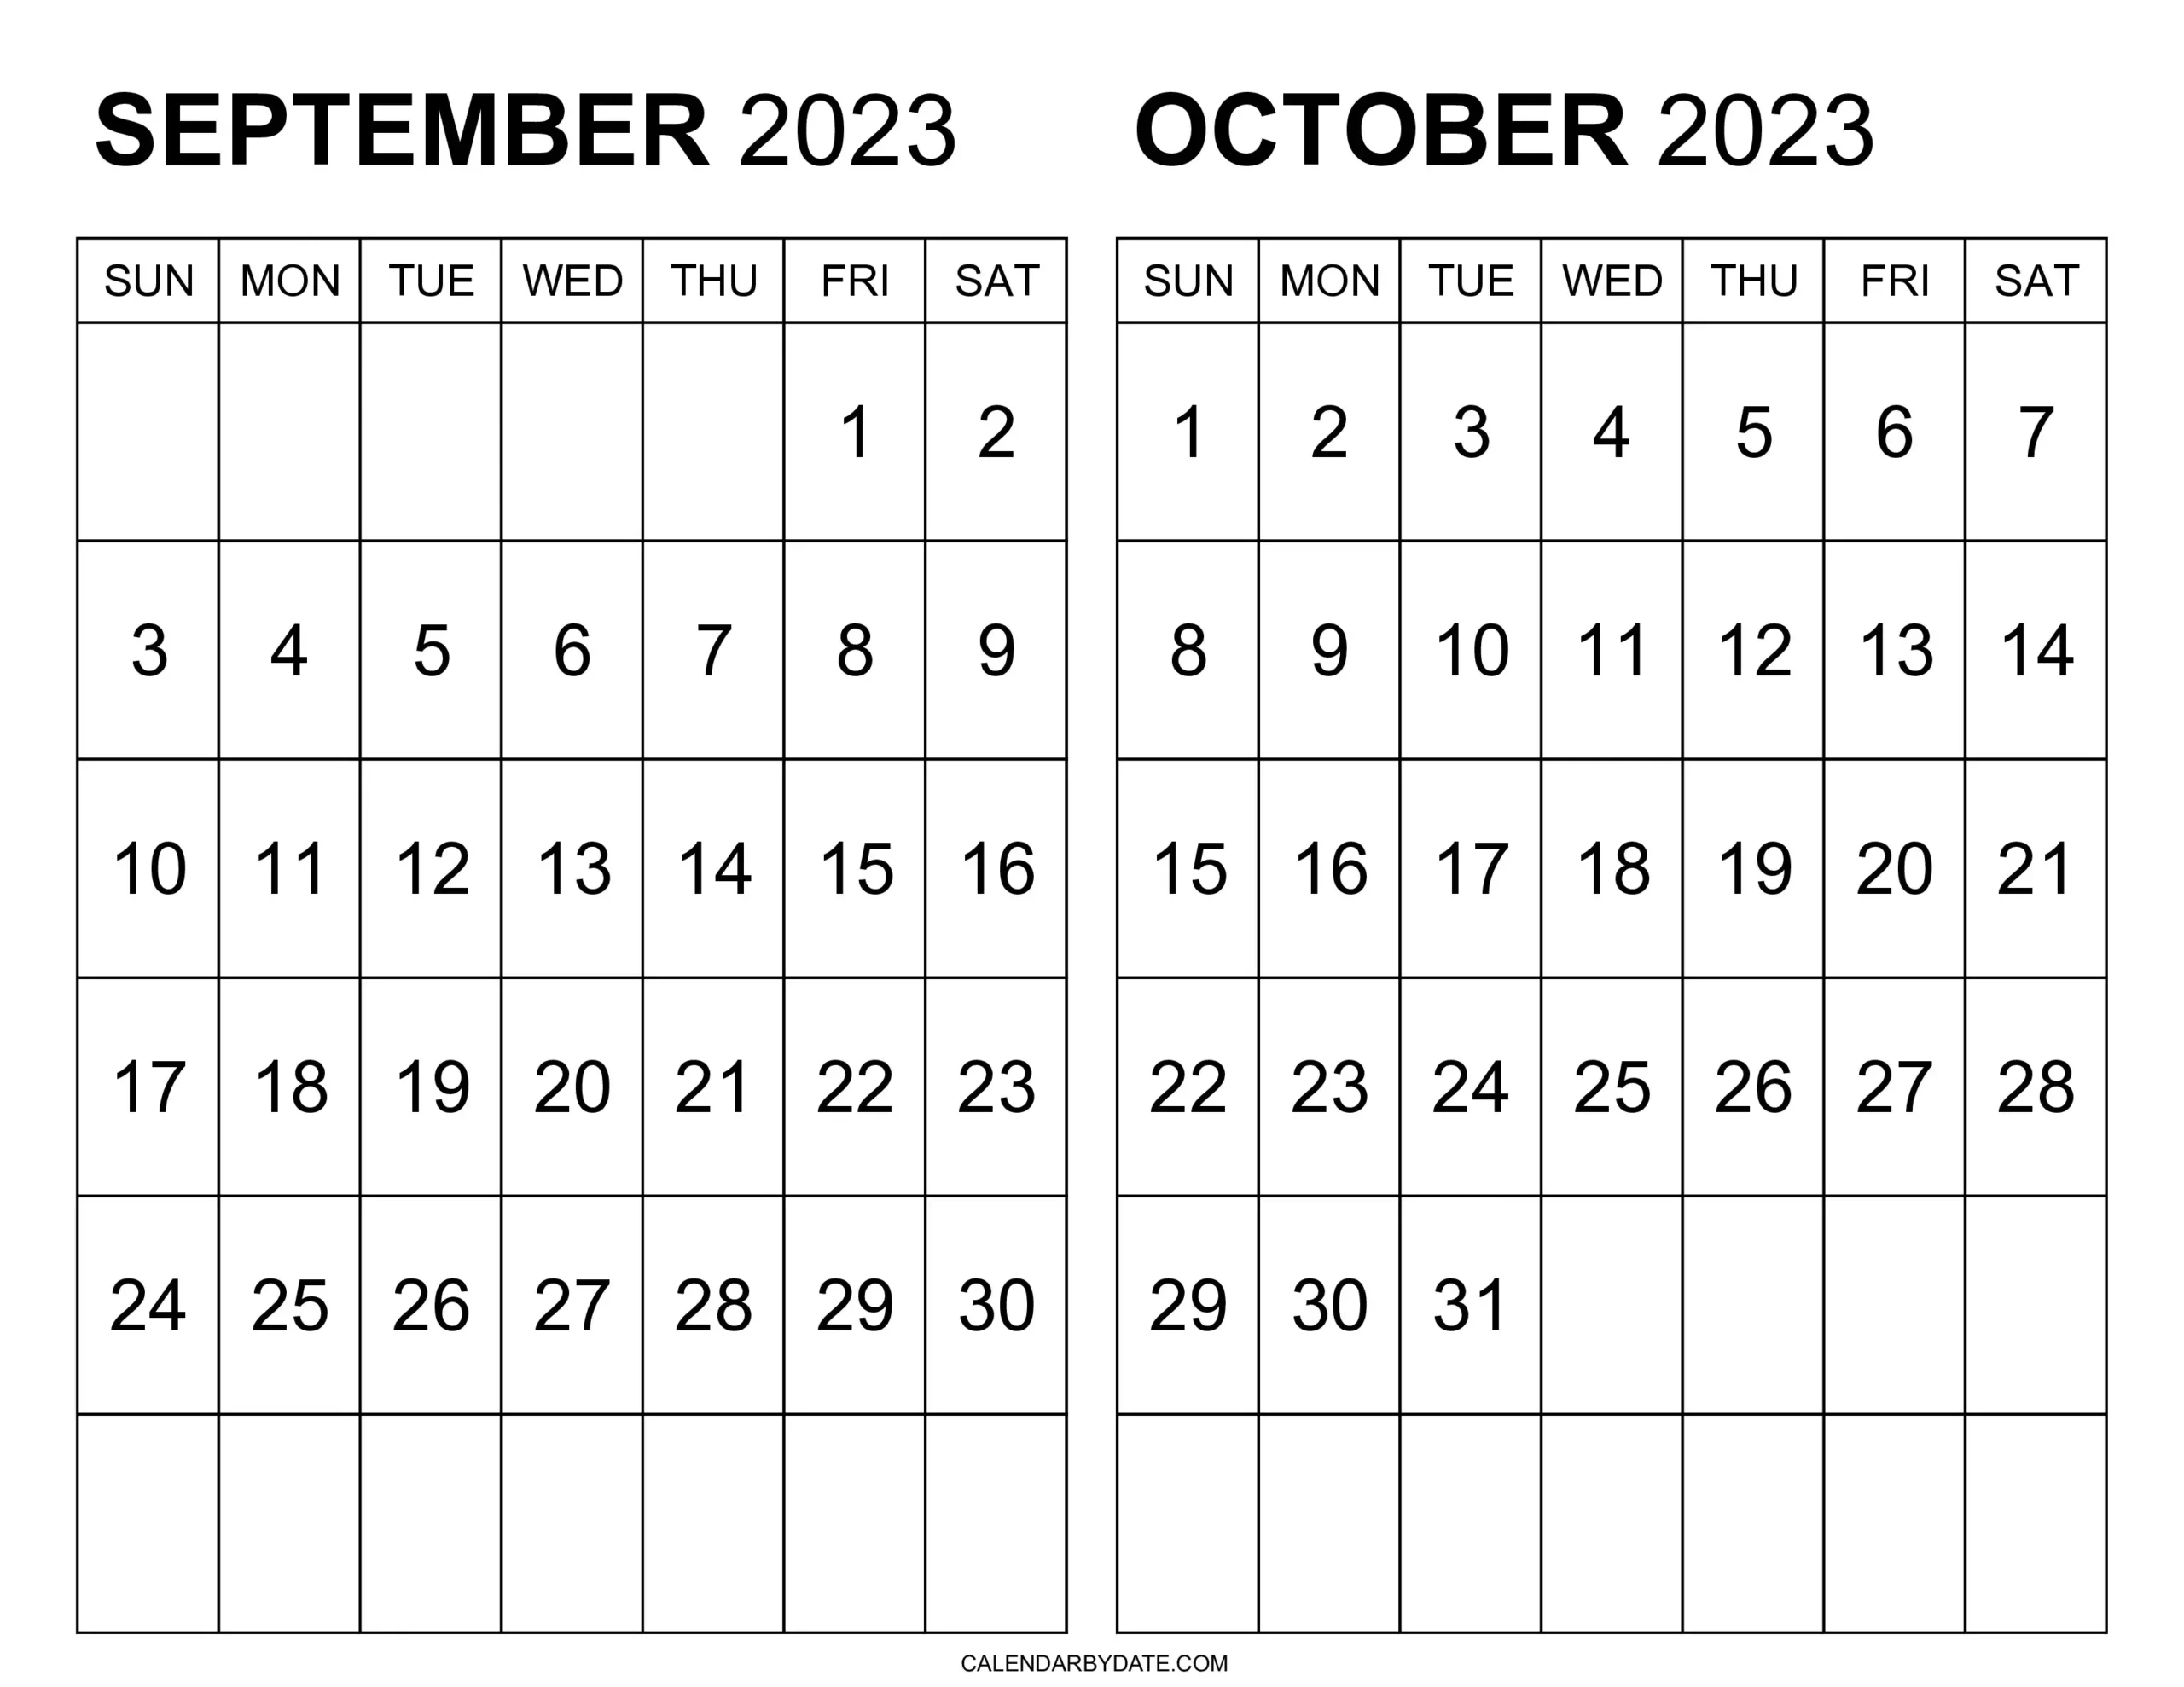 September October 2023 Sunday start calendar template has two grids arranged on one single page. Weekdays are starting from Sunday instead of Monday. Bold monthly dates are written in the grid.